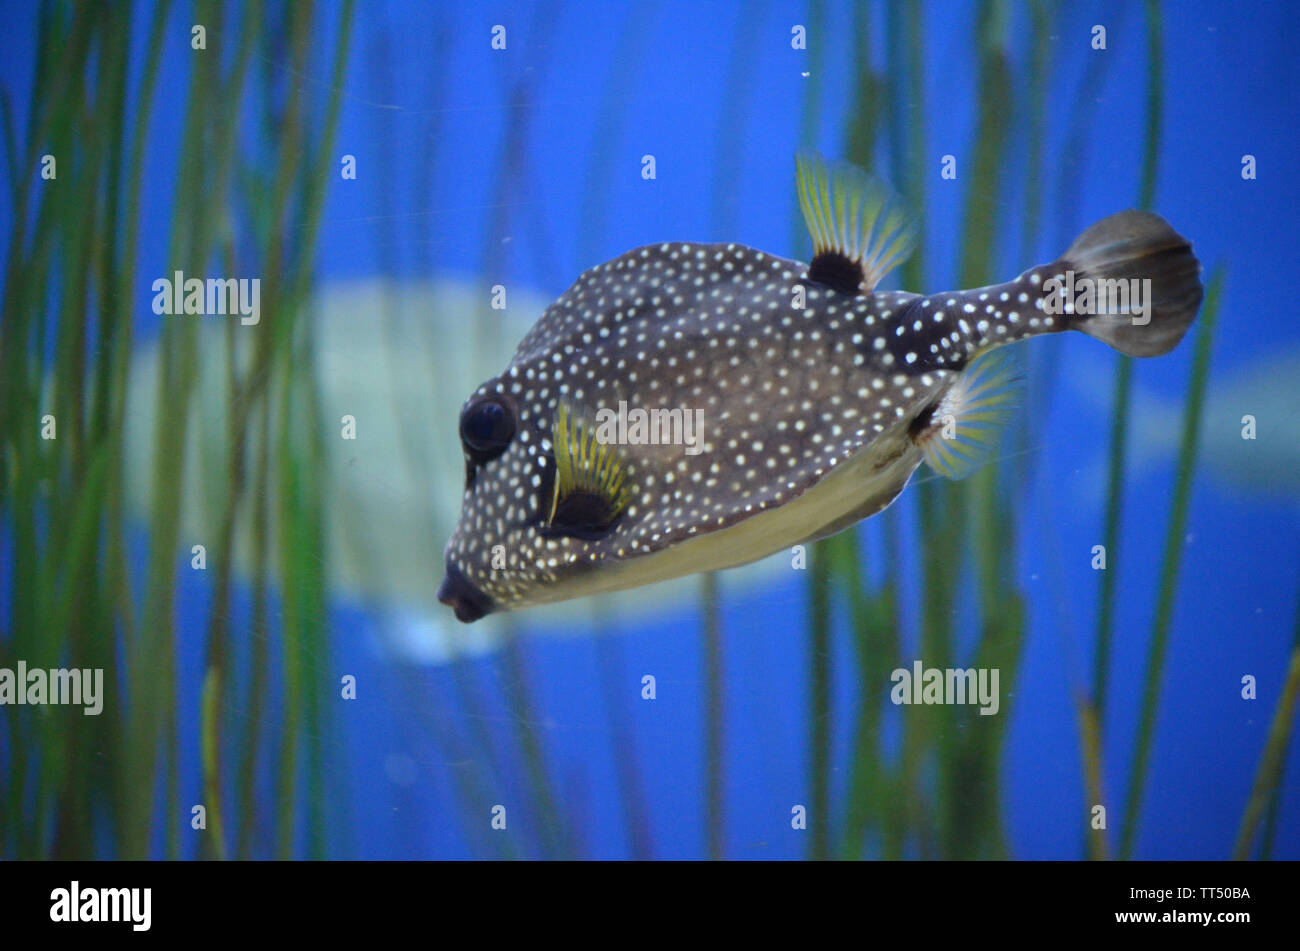 trunkfish with spotted patten glistening as it swims through deep blue water Stock Photo